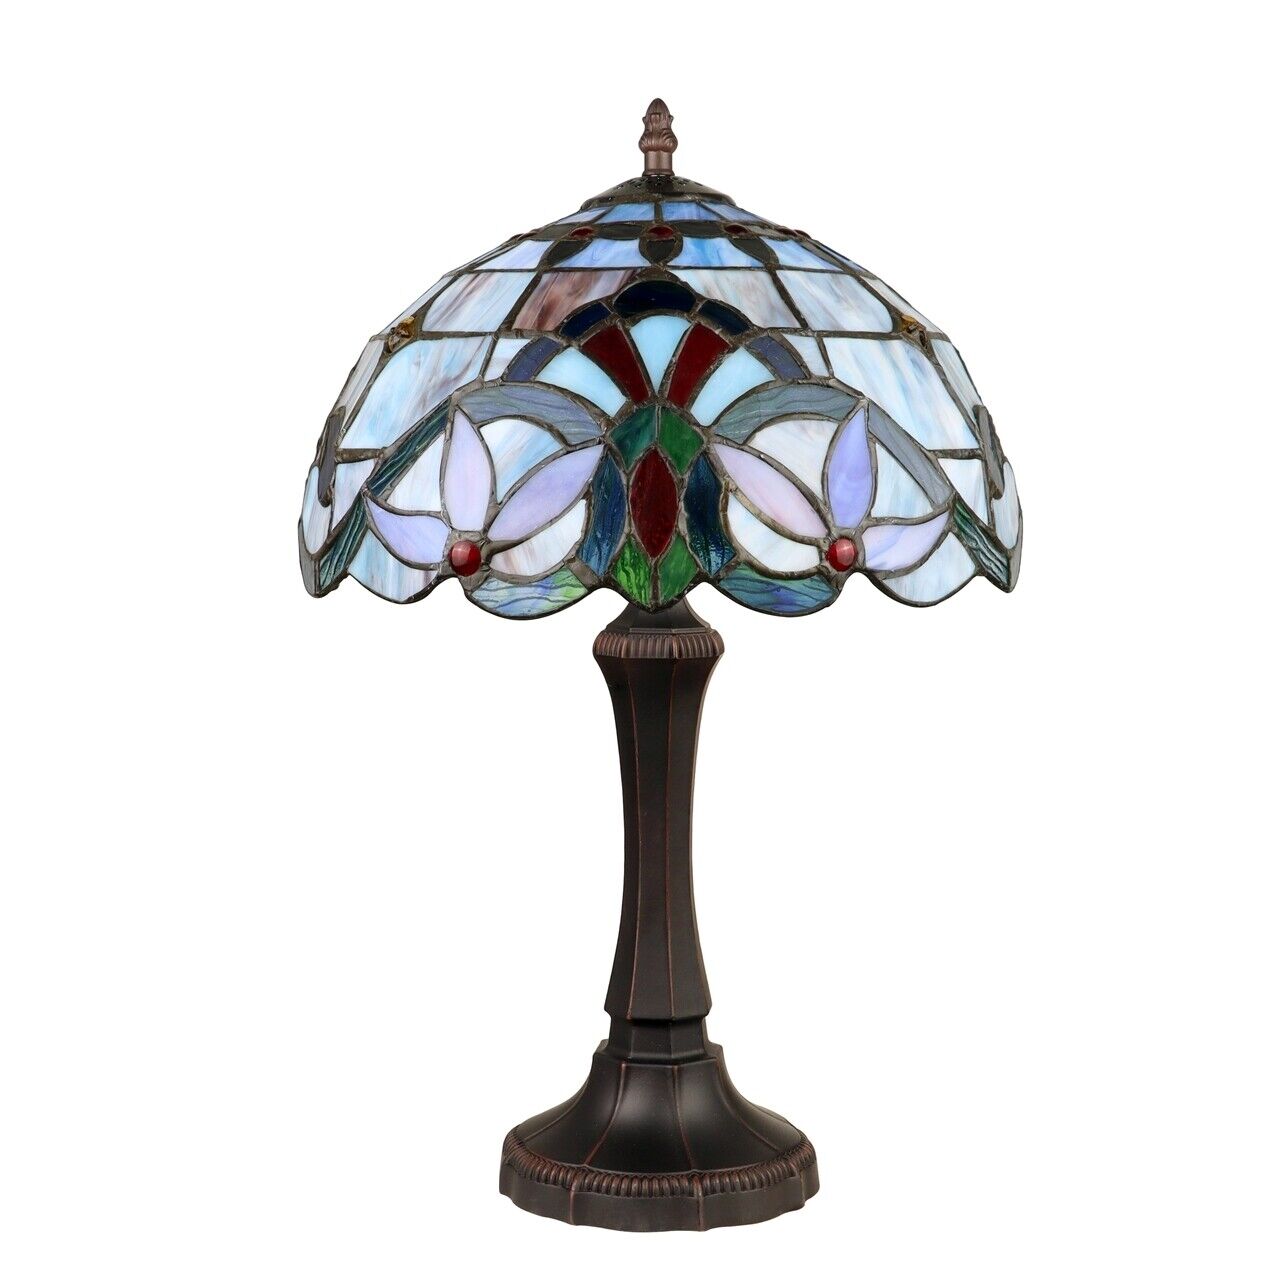 18" 1 light Antique Style Stained Glass Table Lamp